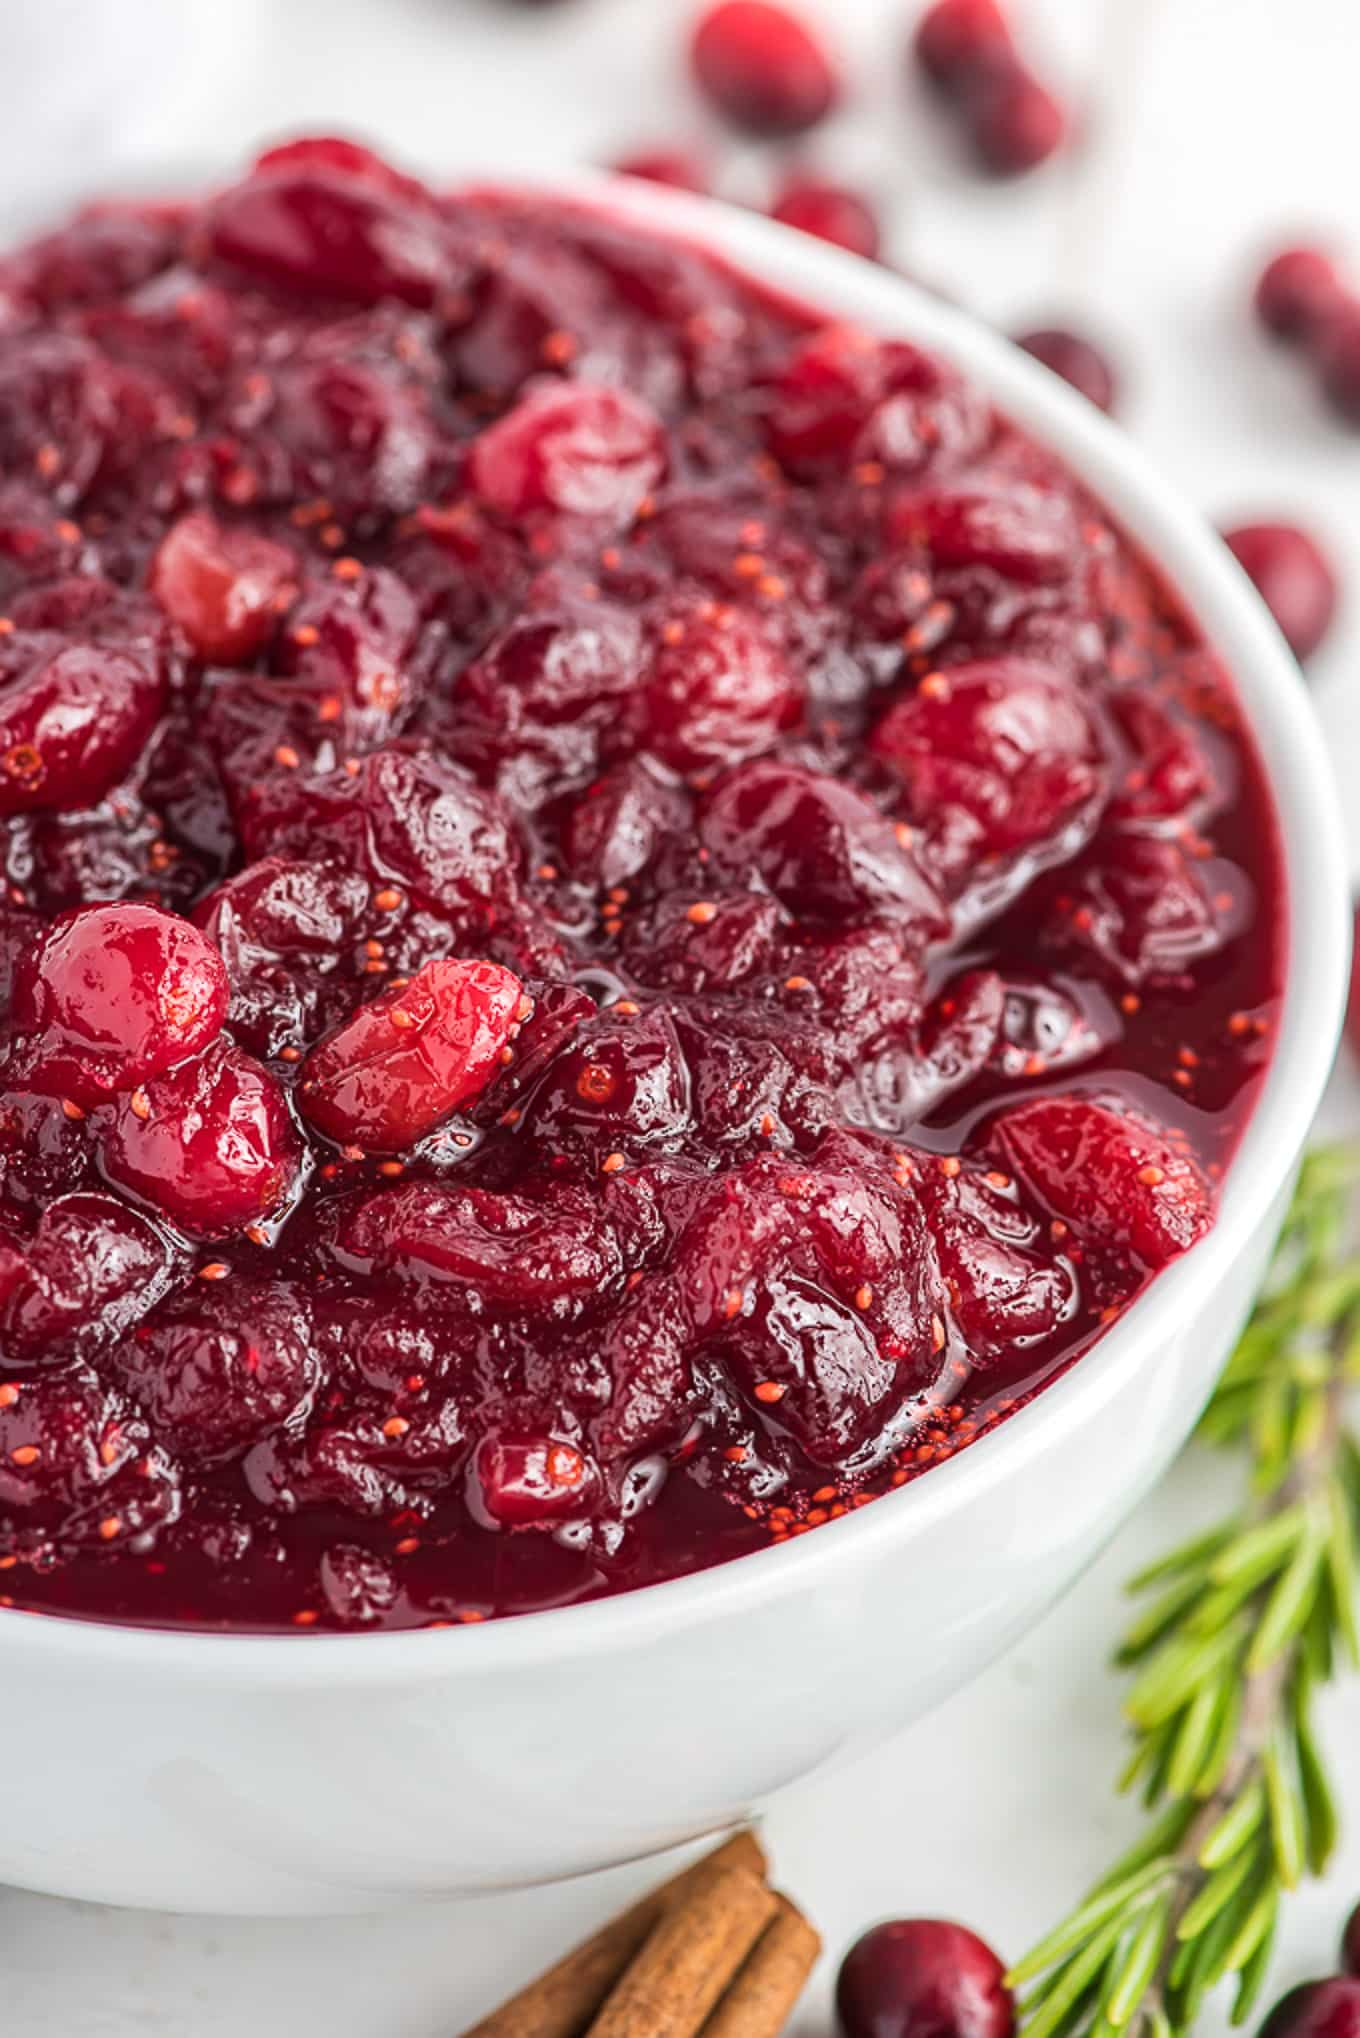 A closeup of a bowl of cranberry sauce ready to serve with sprigs of rosemary, cinnamon sticks and fresh cranberries on the table under the bowl.